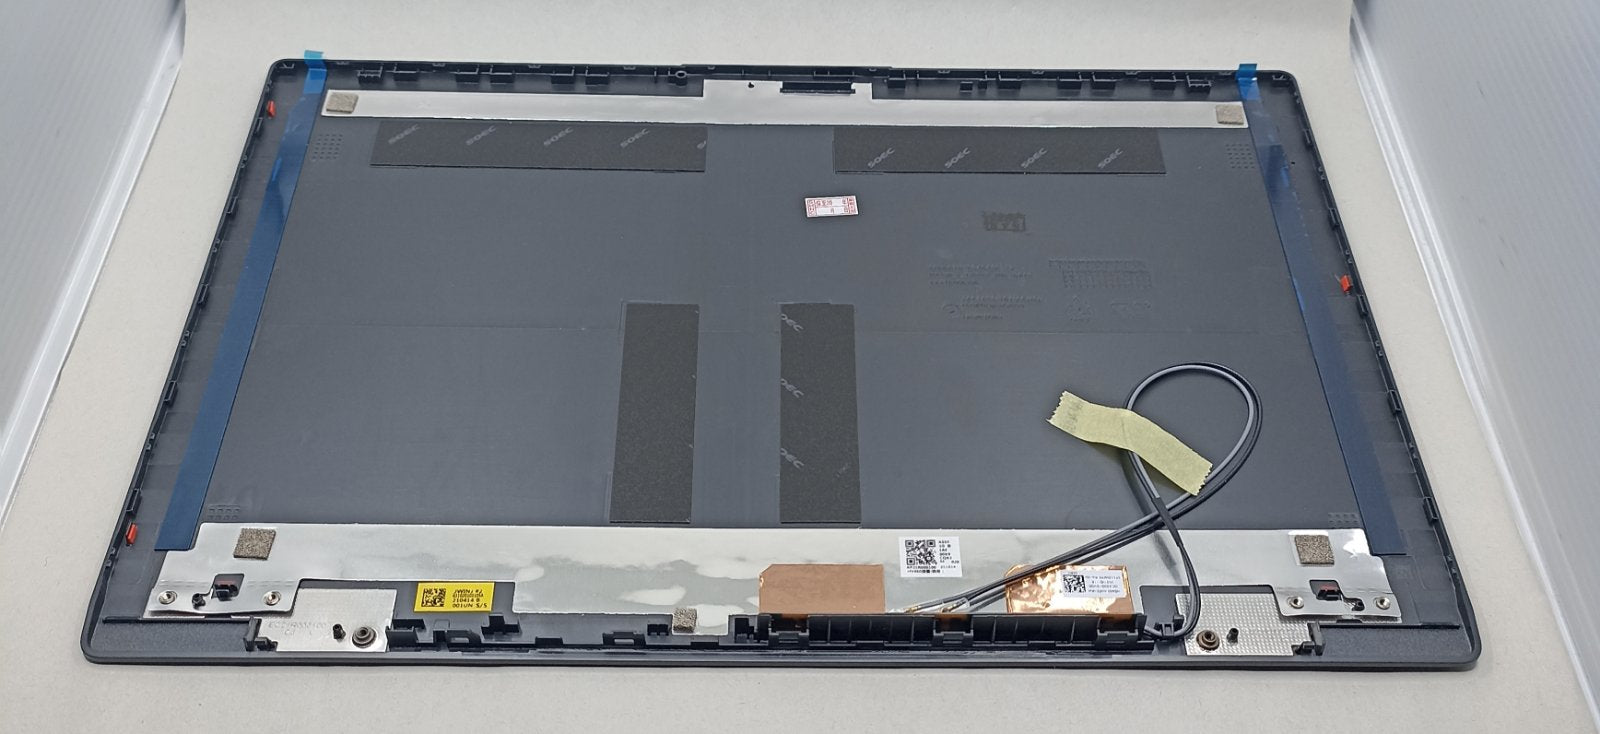 Replacement LCD Cover For Lenovo V14 G2-ALC WL